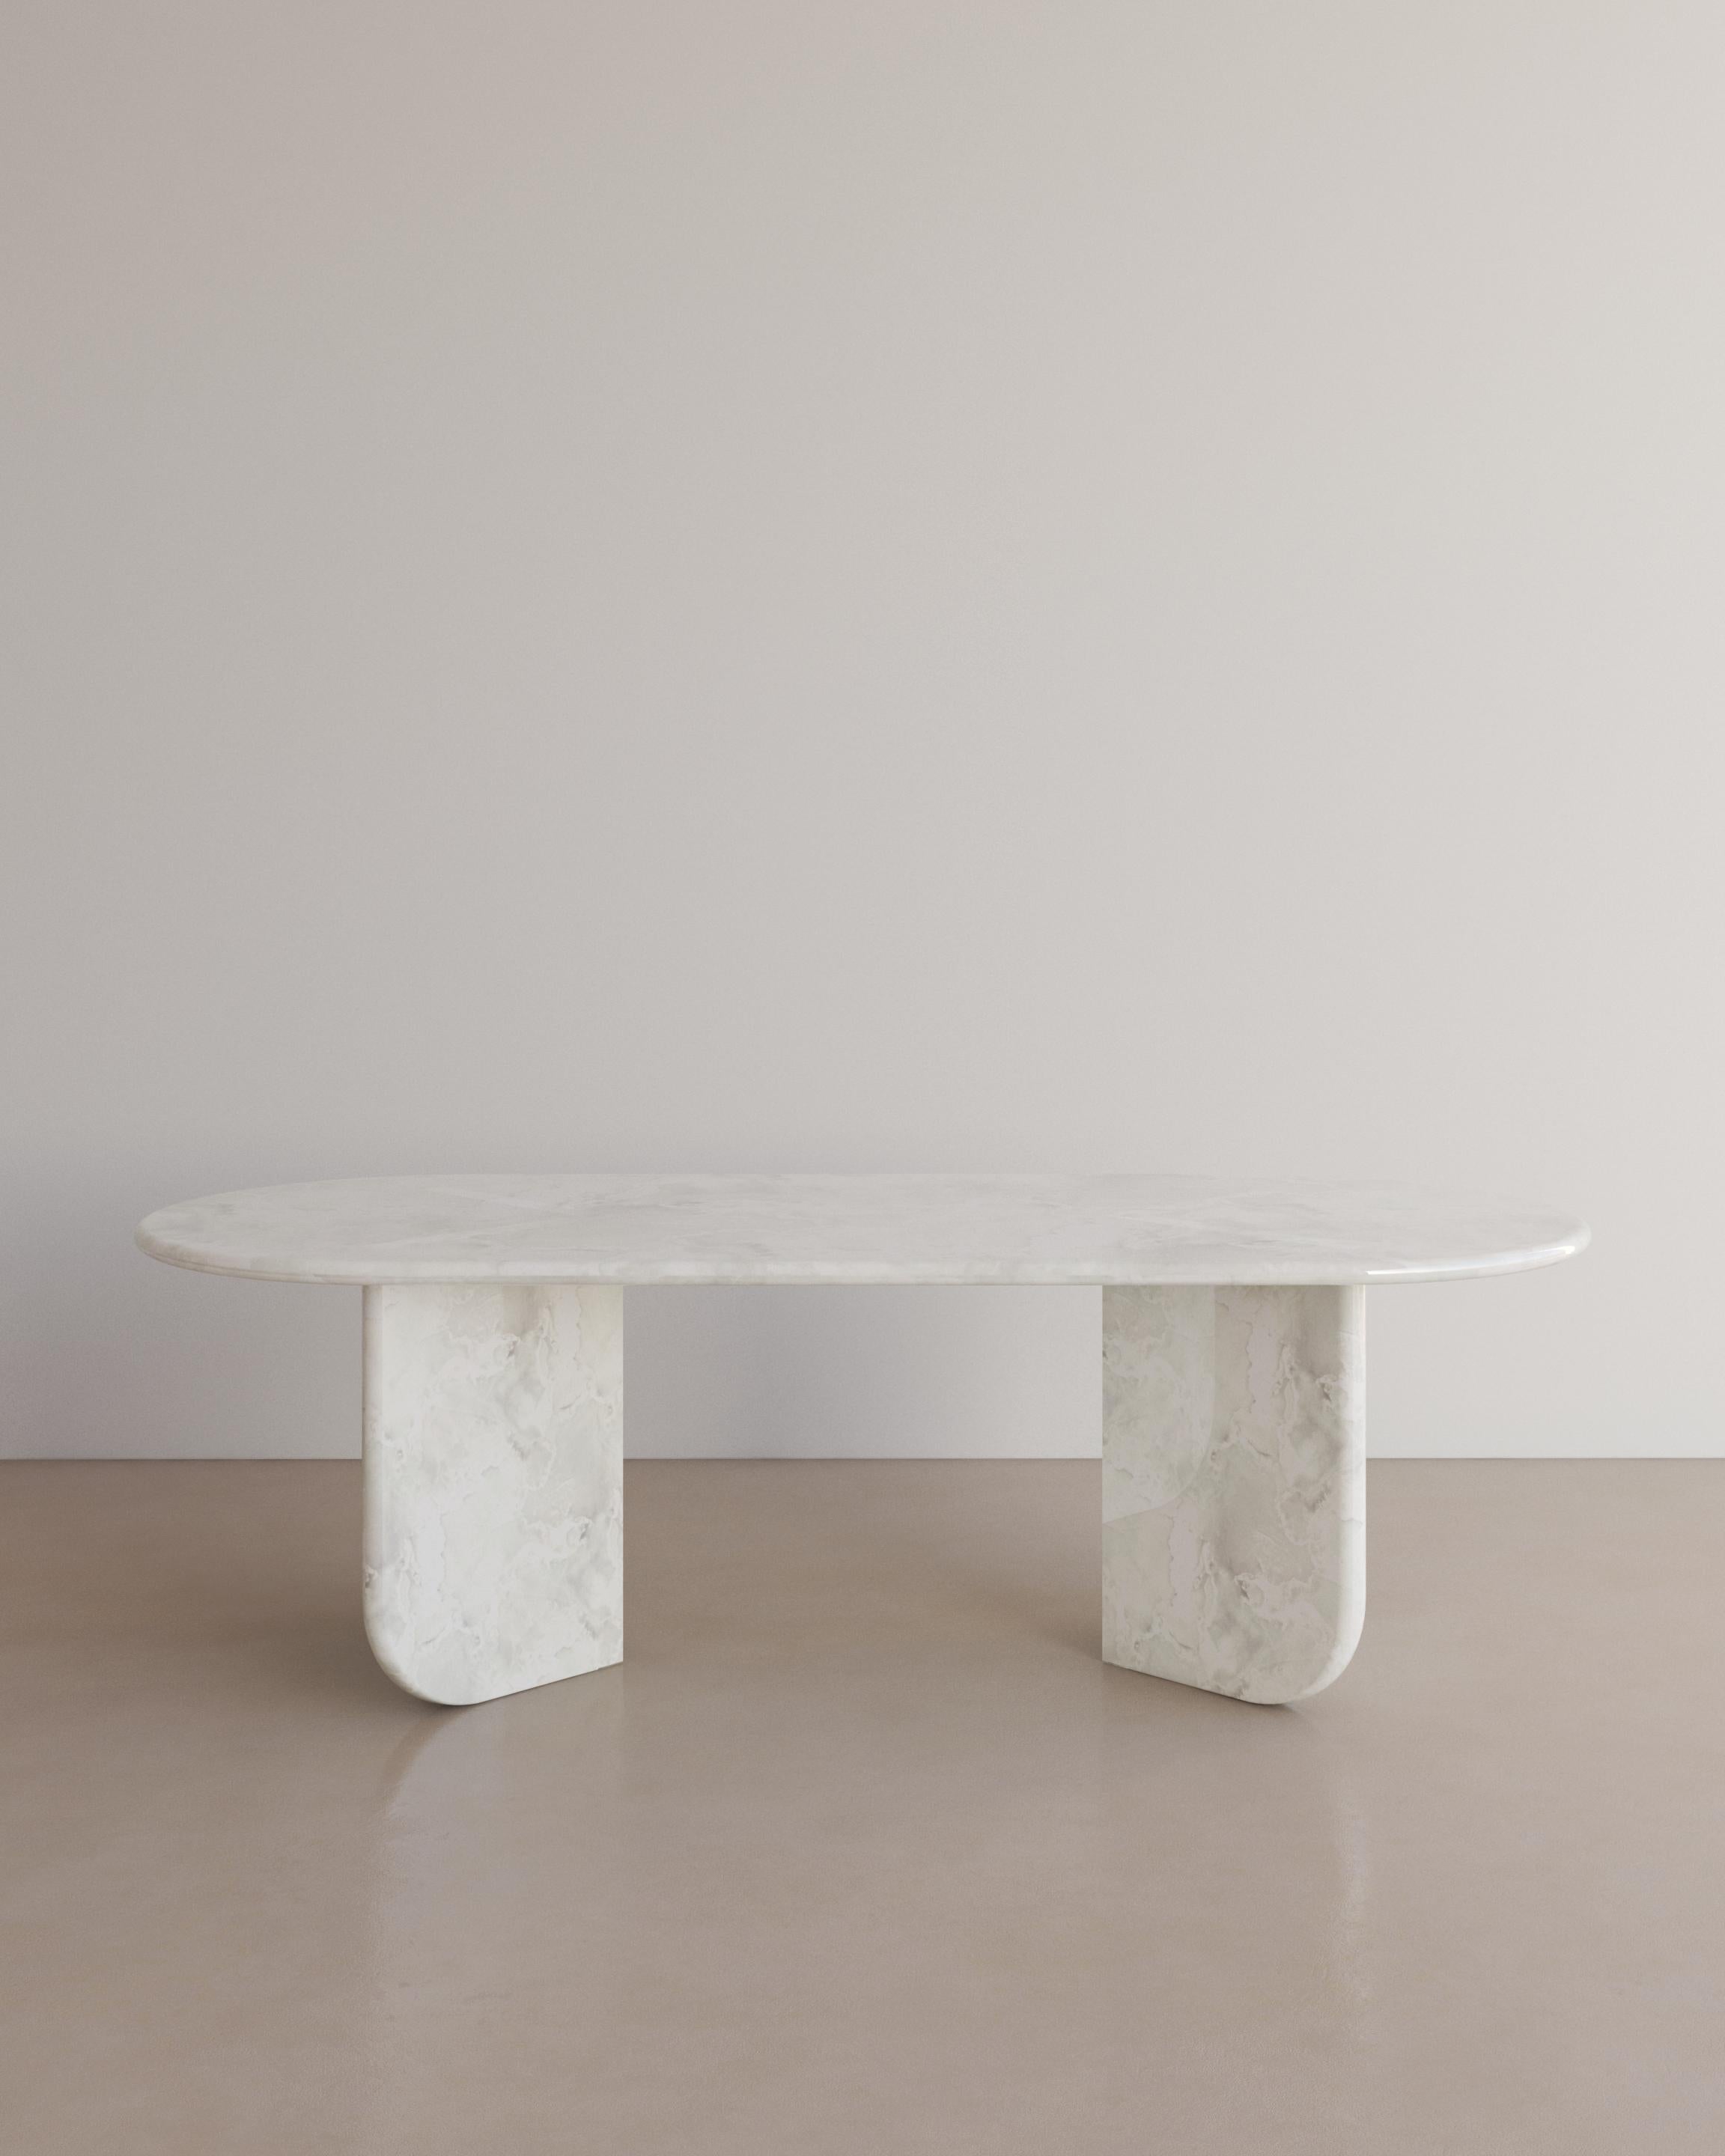 The Essentialist presents the Ètoile Dining Table I in Bianco Onyx. A bold rounded circle effortlessly stacks upon a four point star. Smooth planes exonerate beautiful natural patterning, forging a statement of minimalism that embodies the spirit of